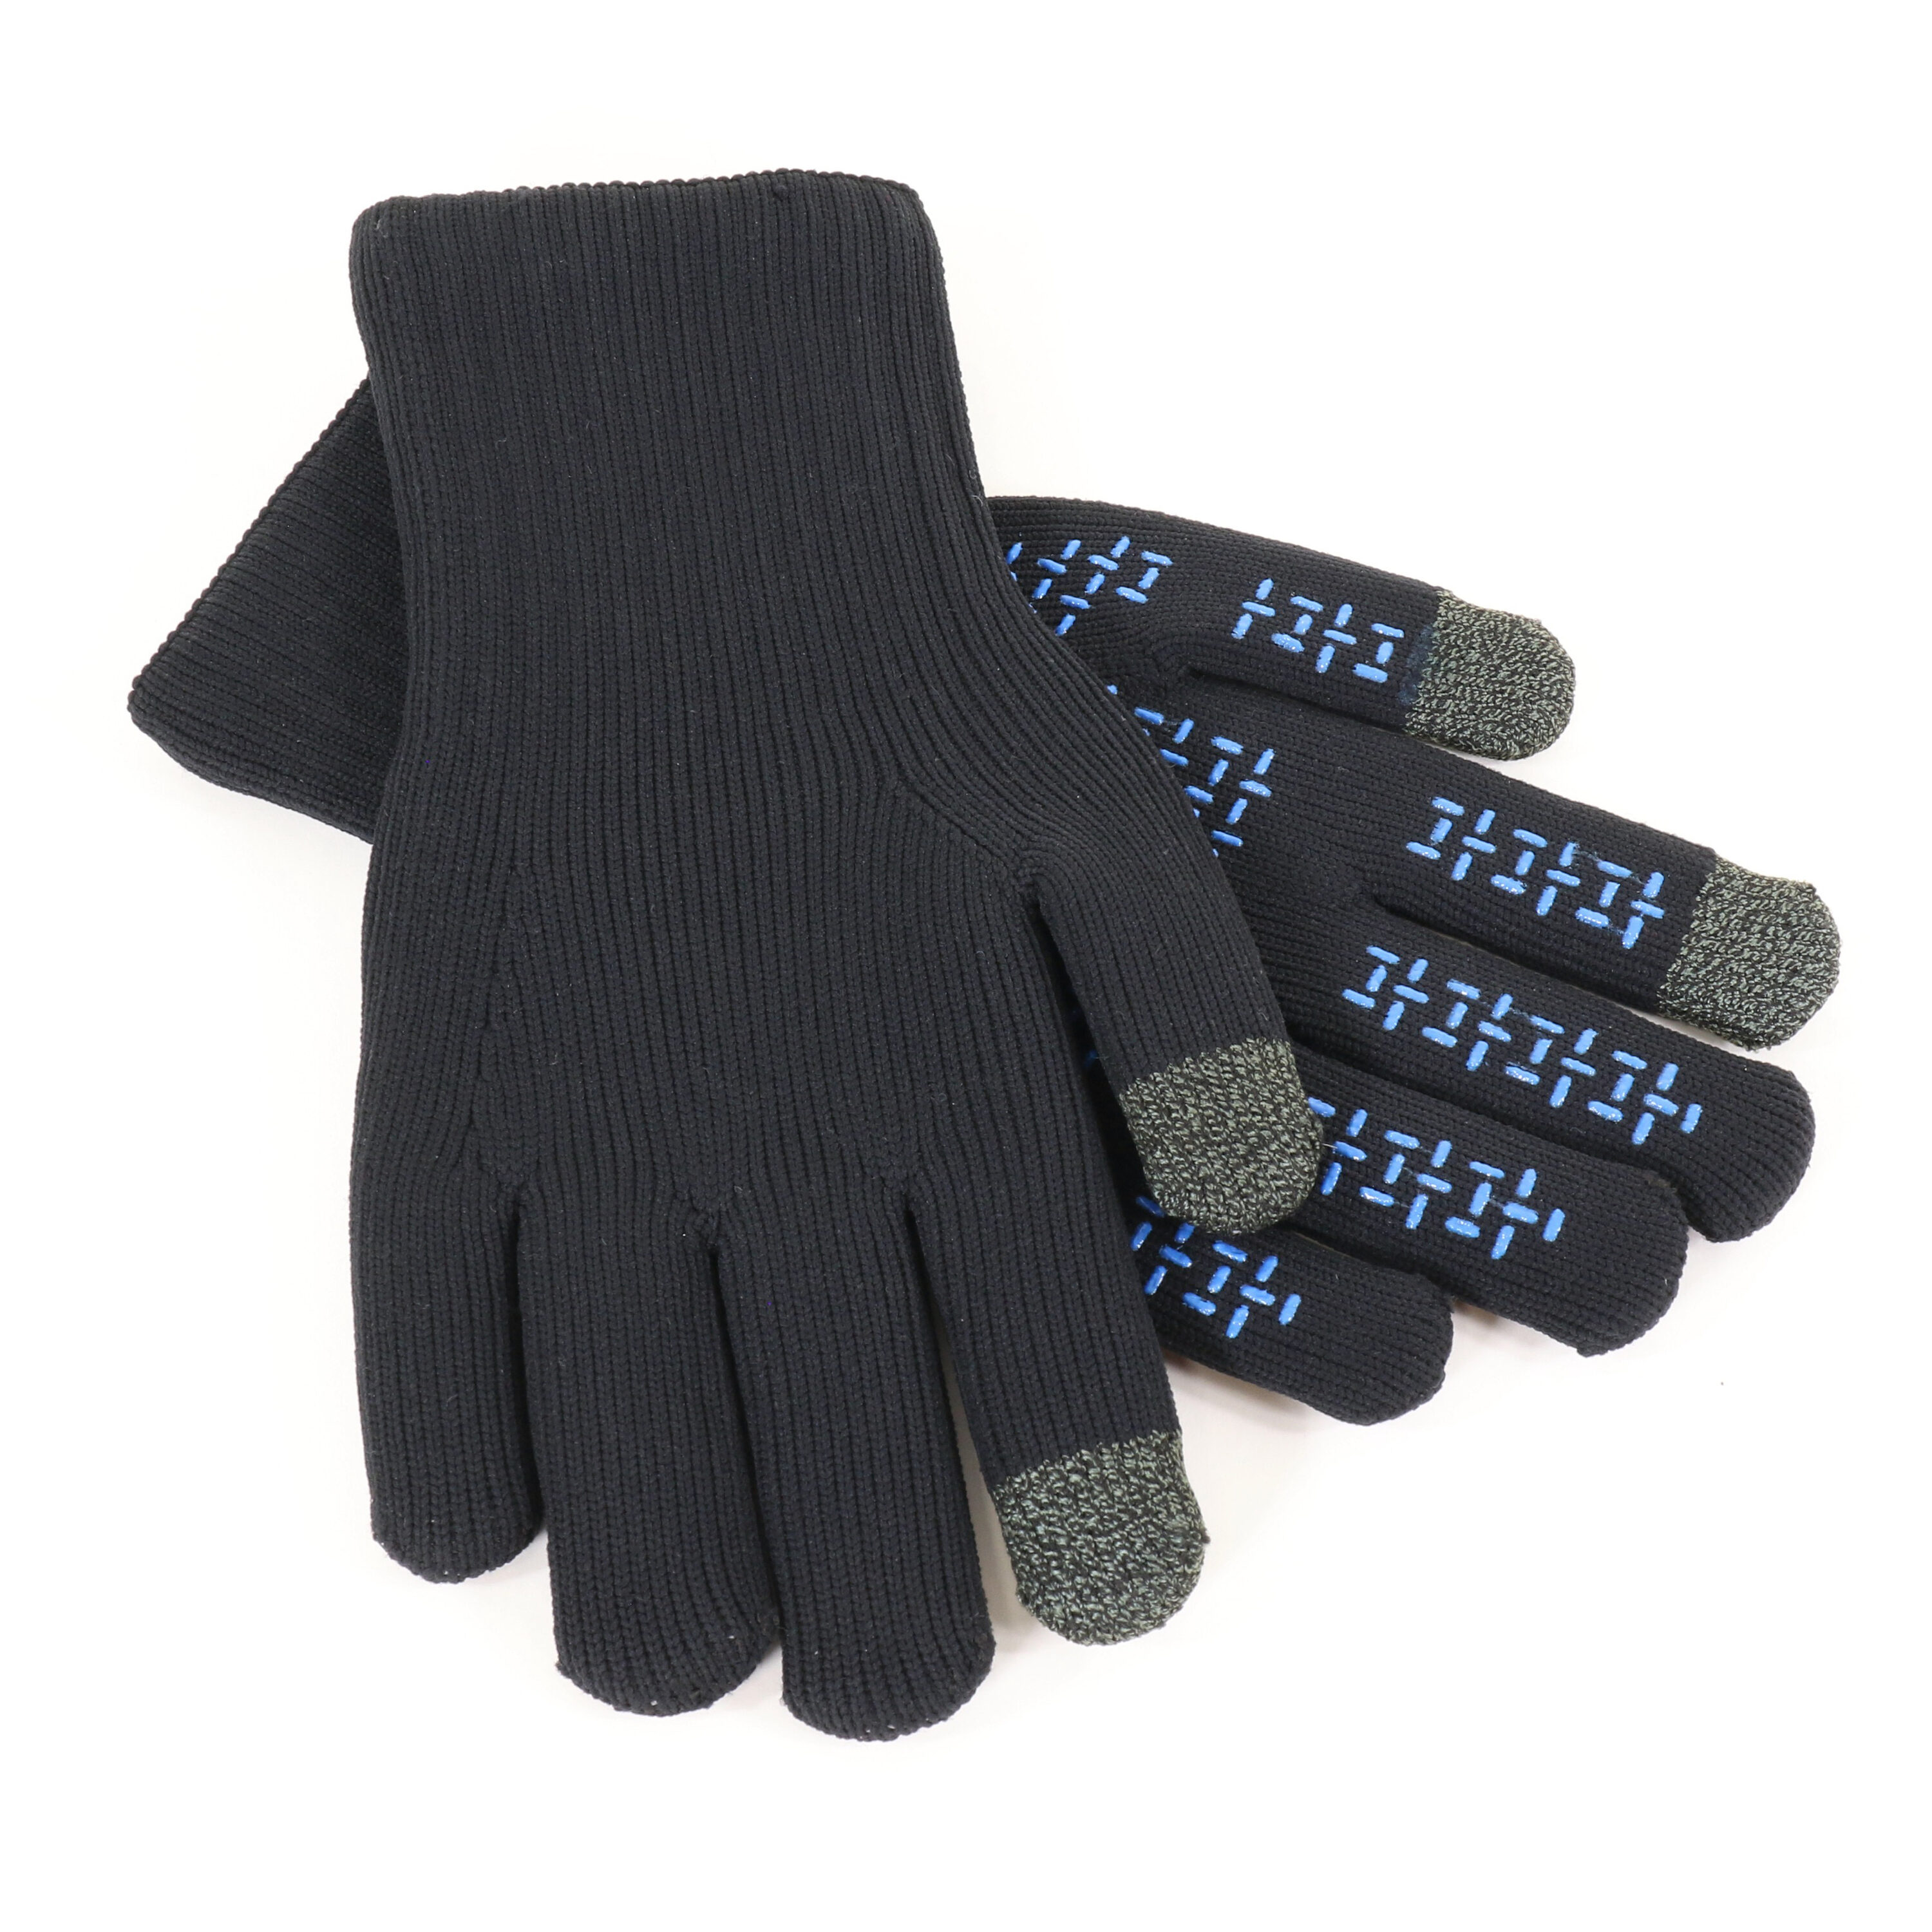 Ice fishing gloves Fishing Gear & Apparel at